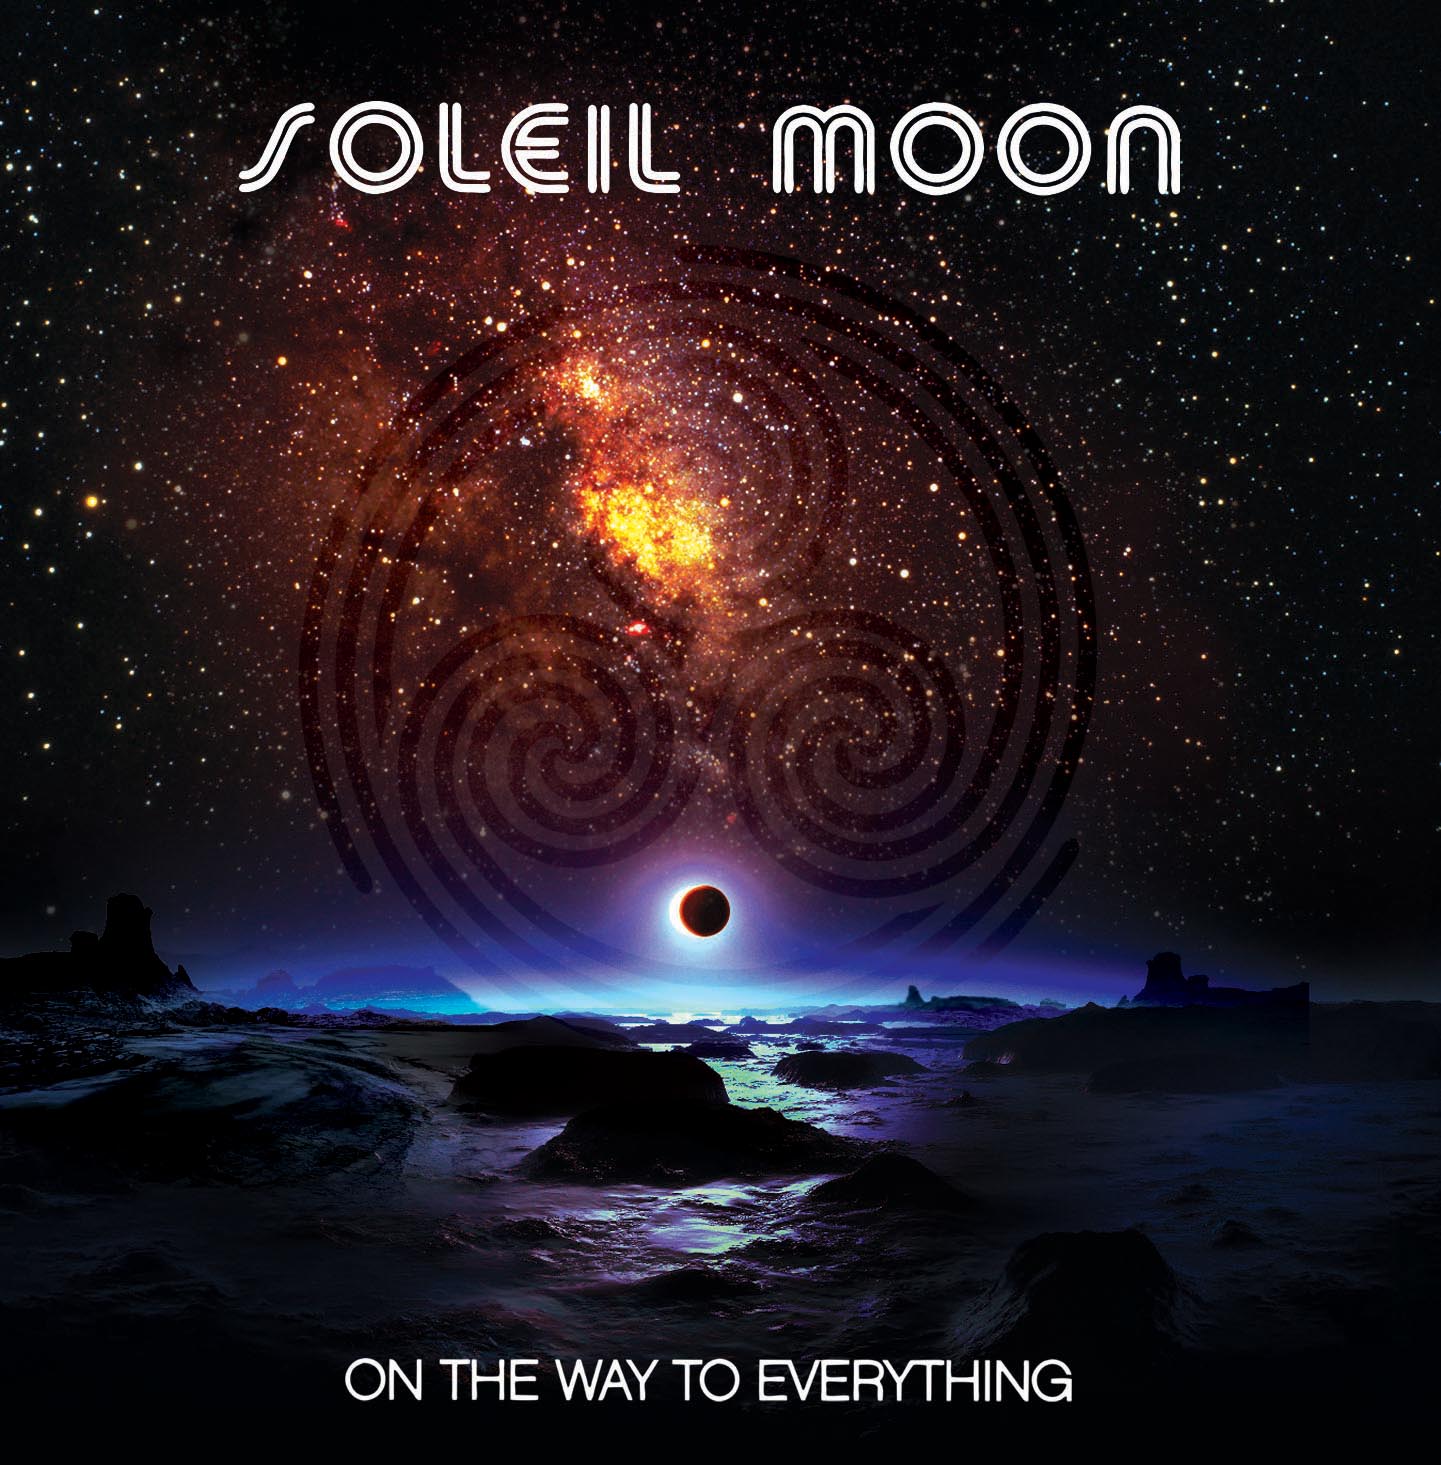 Soleil Moon - On the Way to Everything